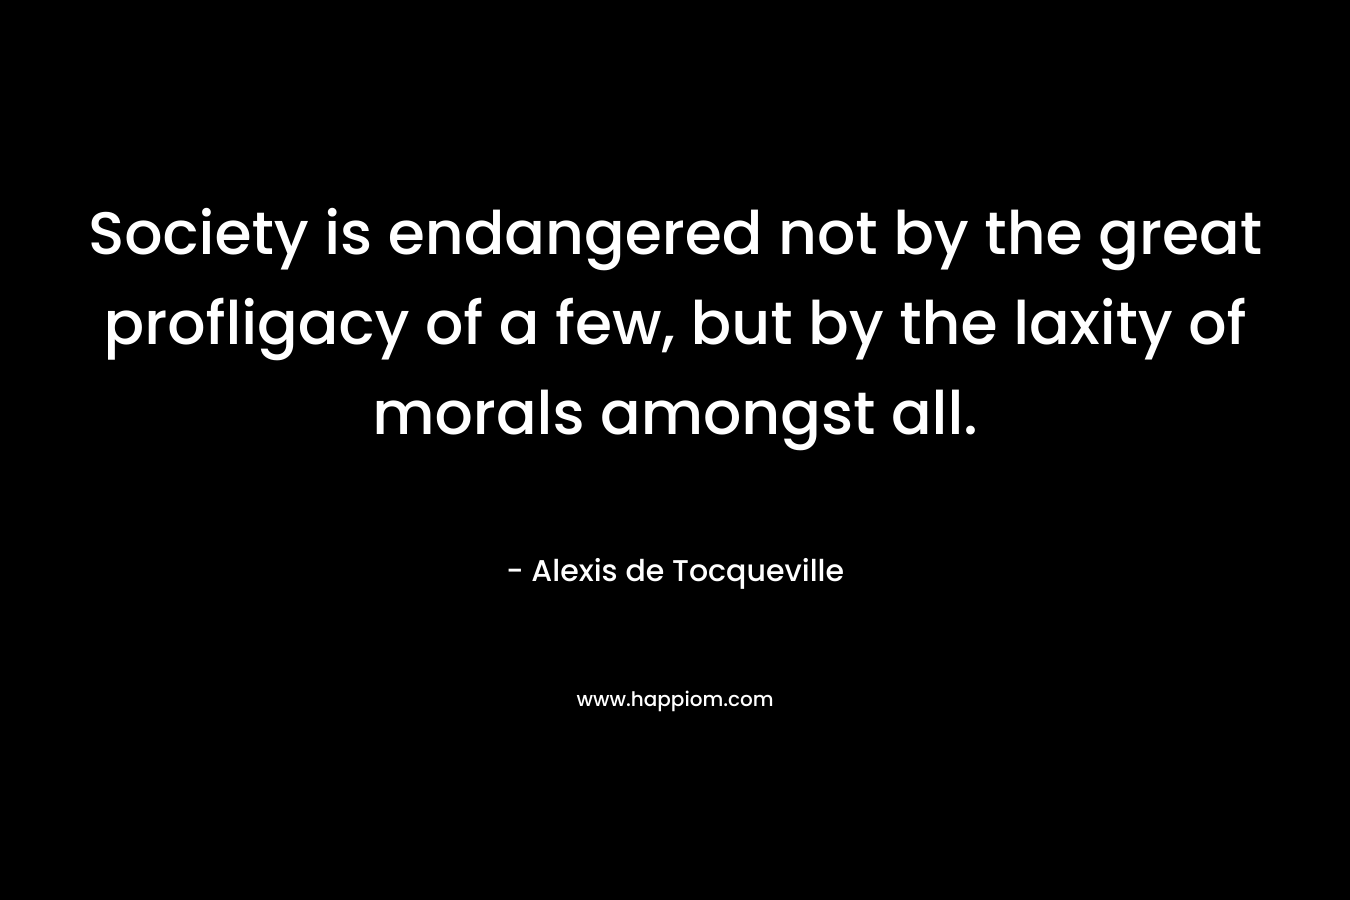 Society is endangered not by the great profligacy of a few, but by the laxity of morals amongst all.